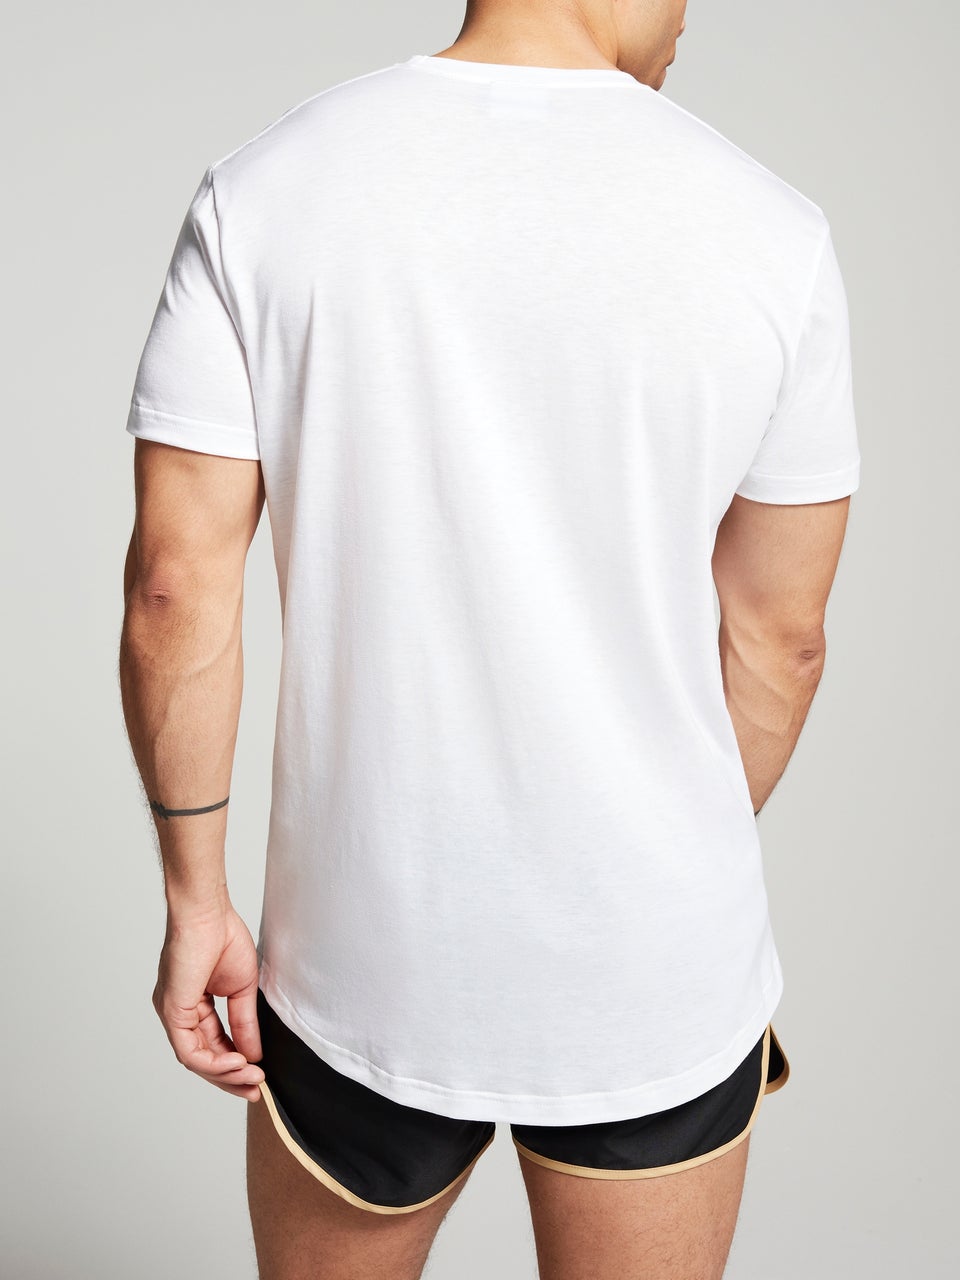 'The Actor' T-shirt - White with LOGO